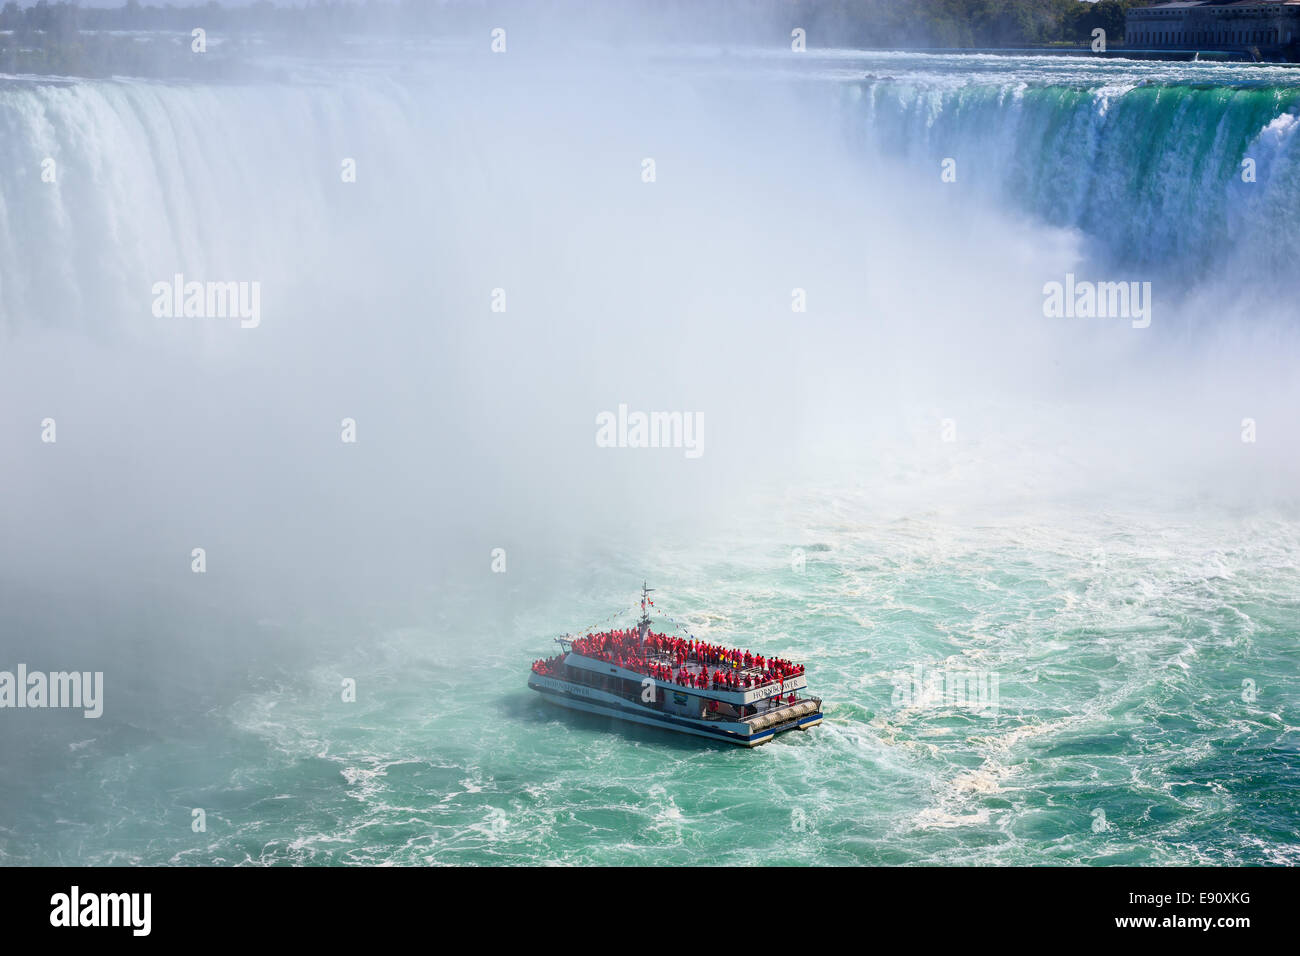 The Hornblower loaded with tourists entering the Horseshoe Falls, part of the Niagara Falls, Ontario, Canada. Stock Photo